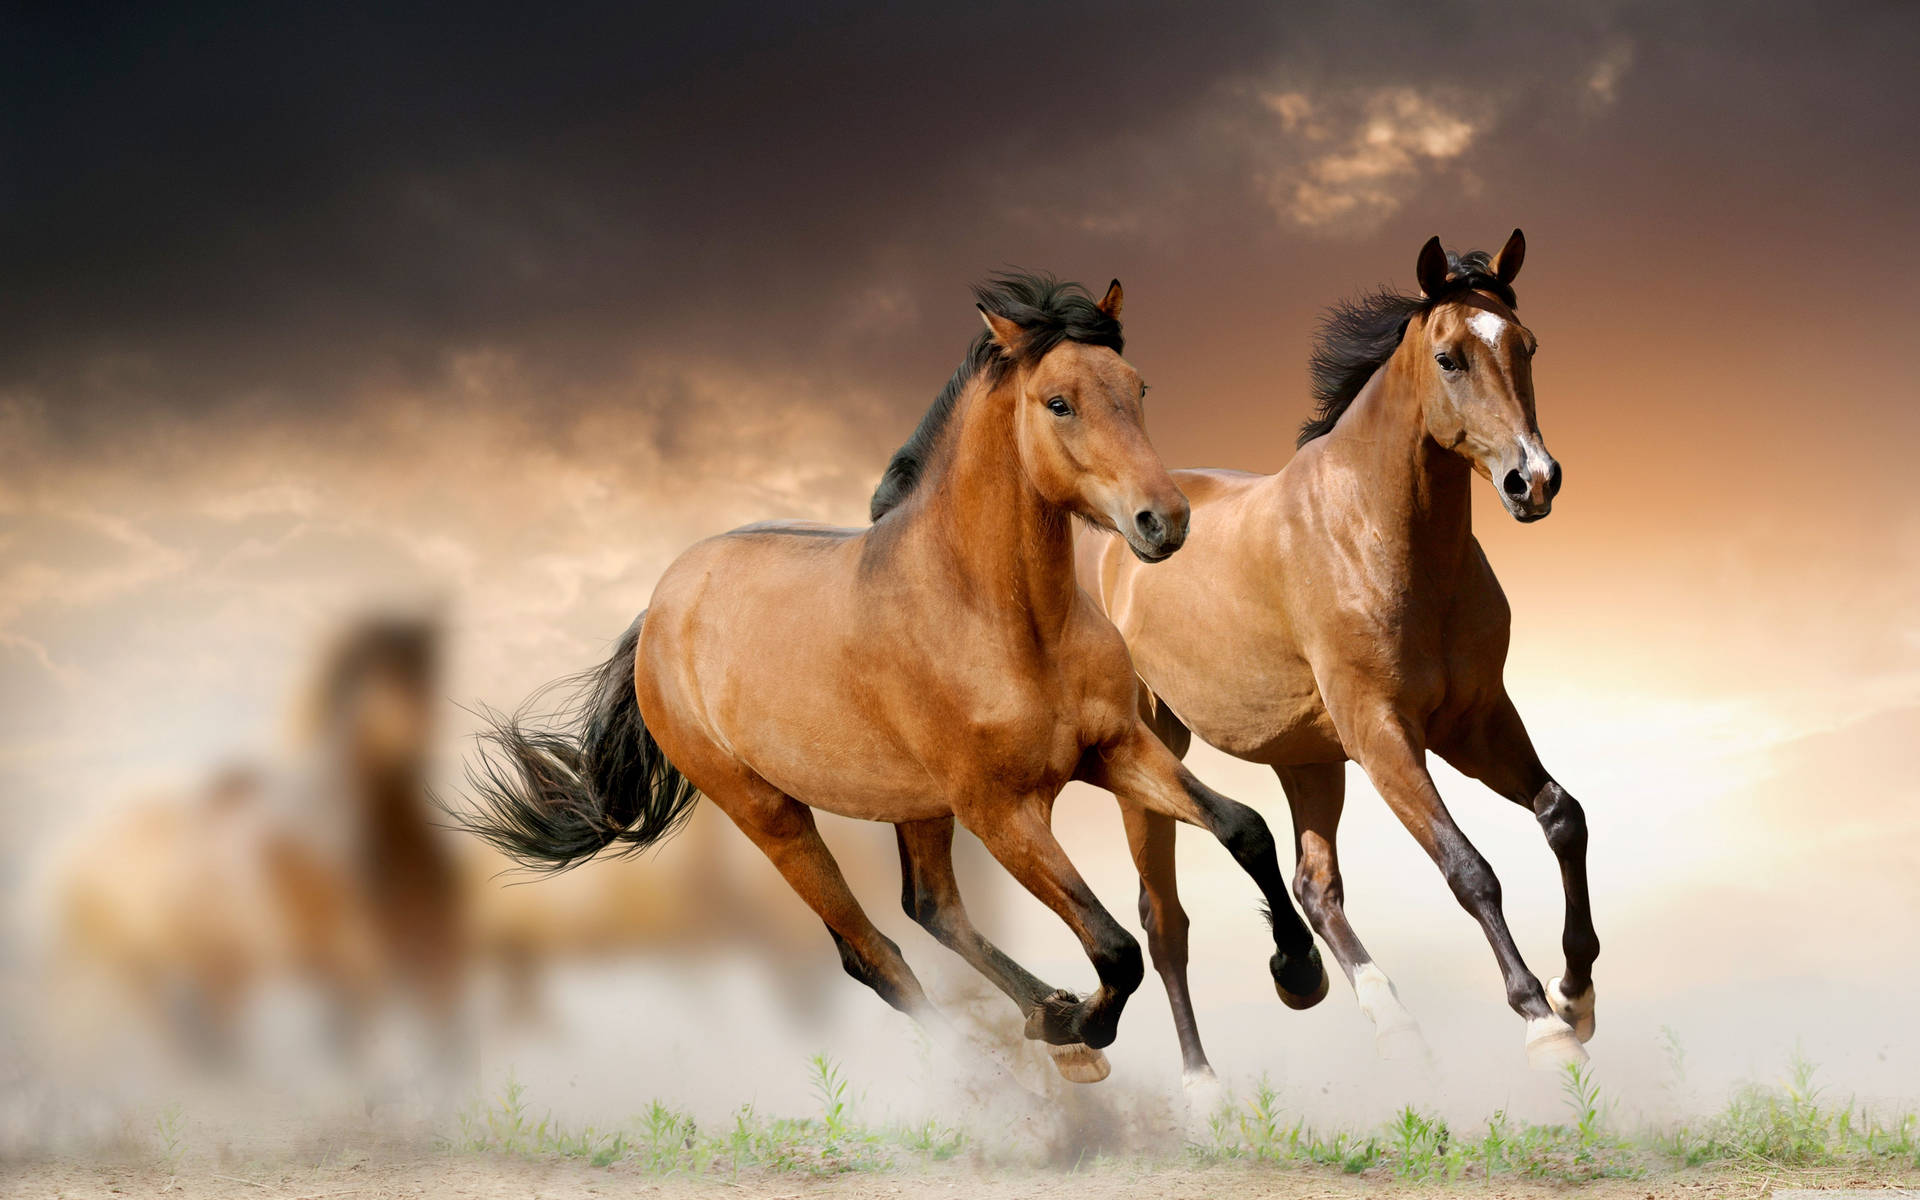 500+] Horse Wallpapers for FREE 